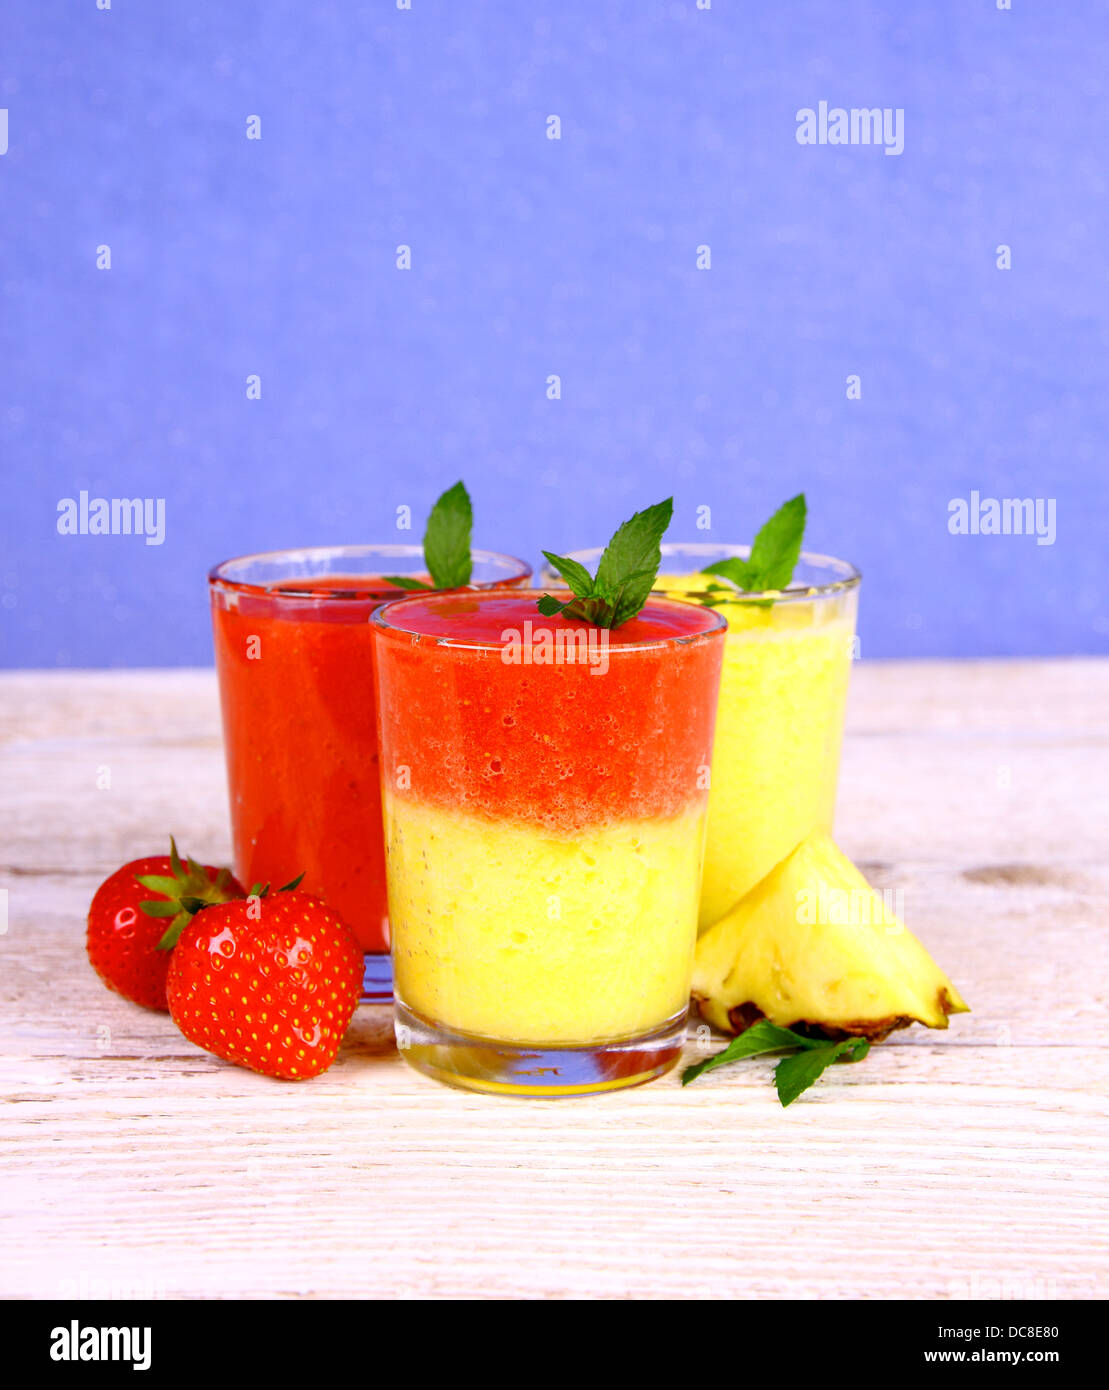 Strawberry and pineapple smoothie mixed on blue background, close up Stock Photo